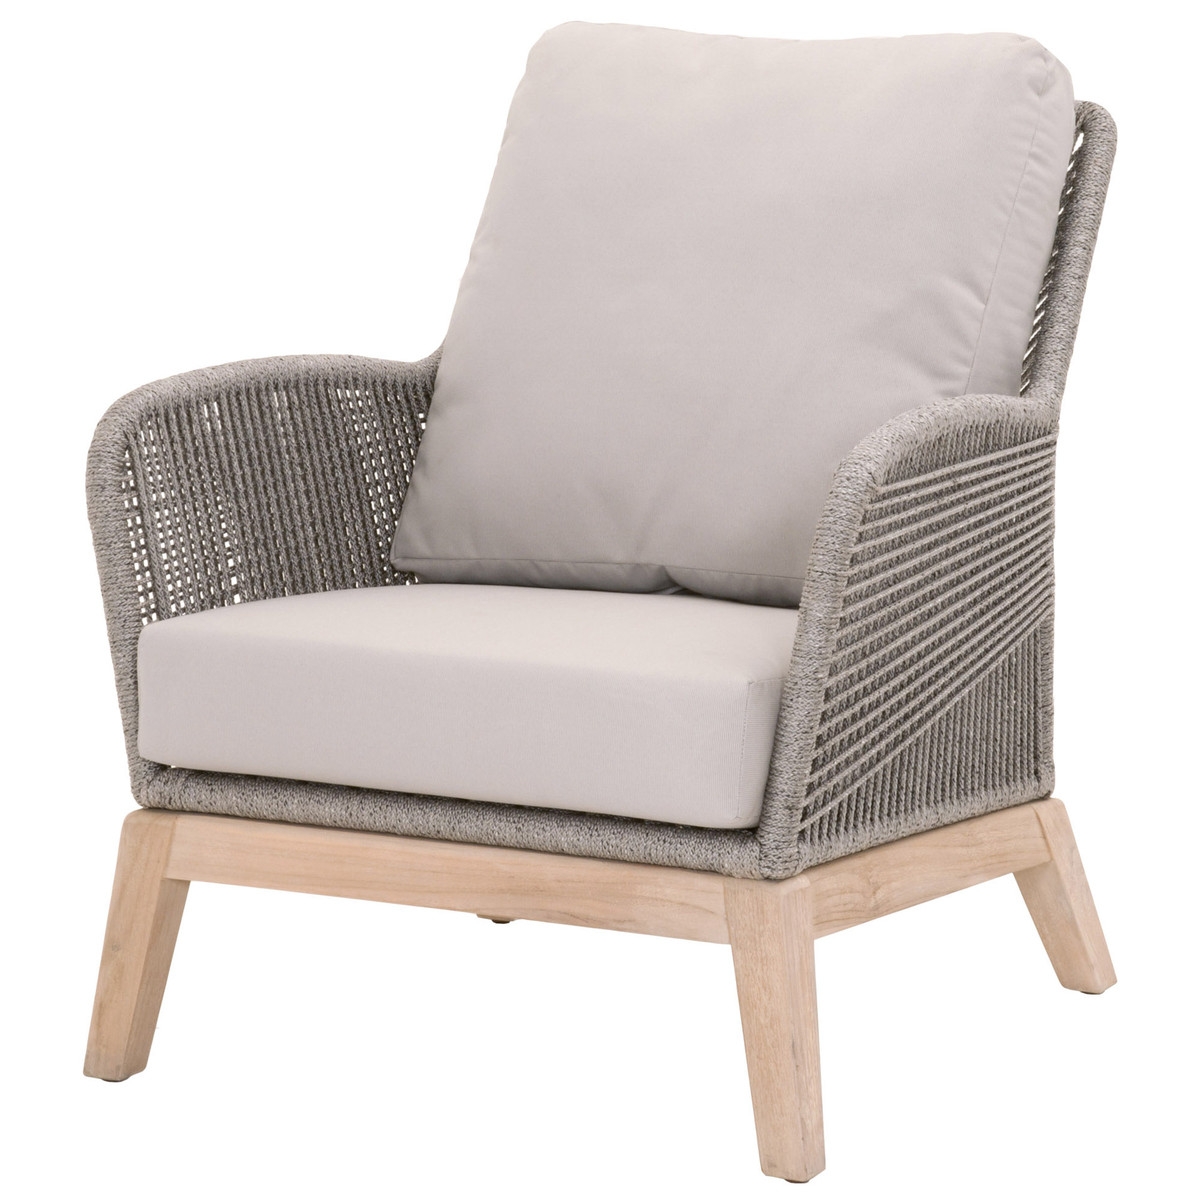 Loom Outdoor Club Chair - Image 1